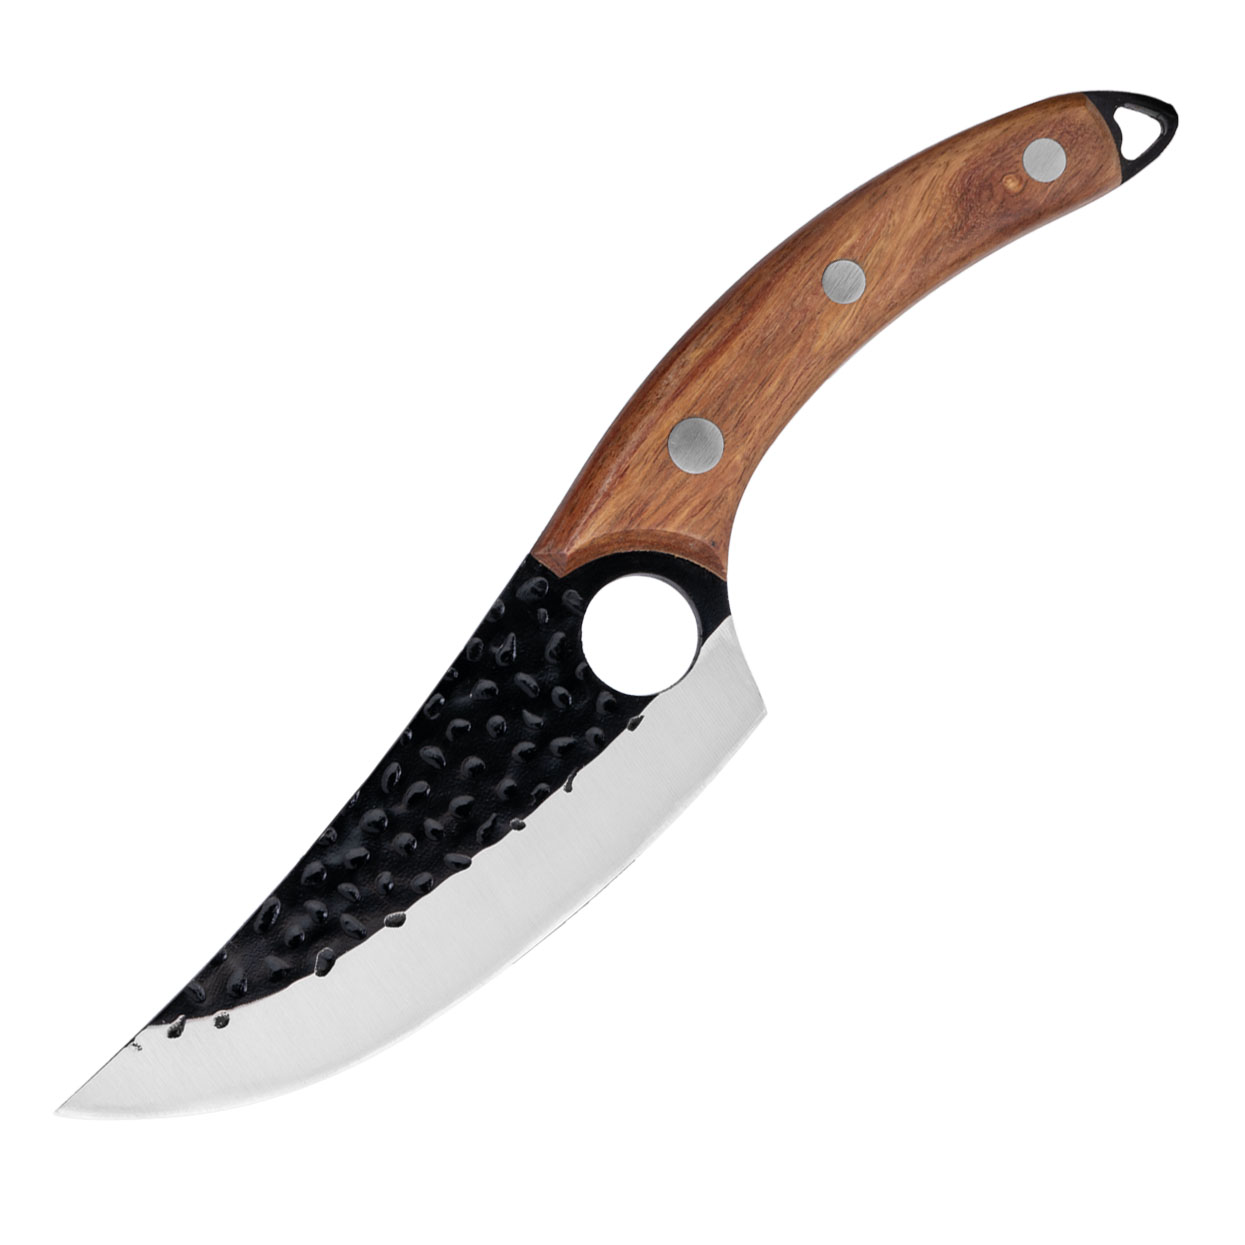 Paofu 6" Full Tang Curved Handmade Forged Carbon Steel Butcher Knife Light Brown